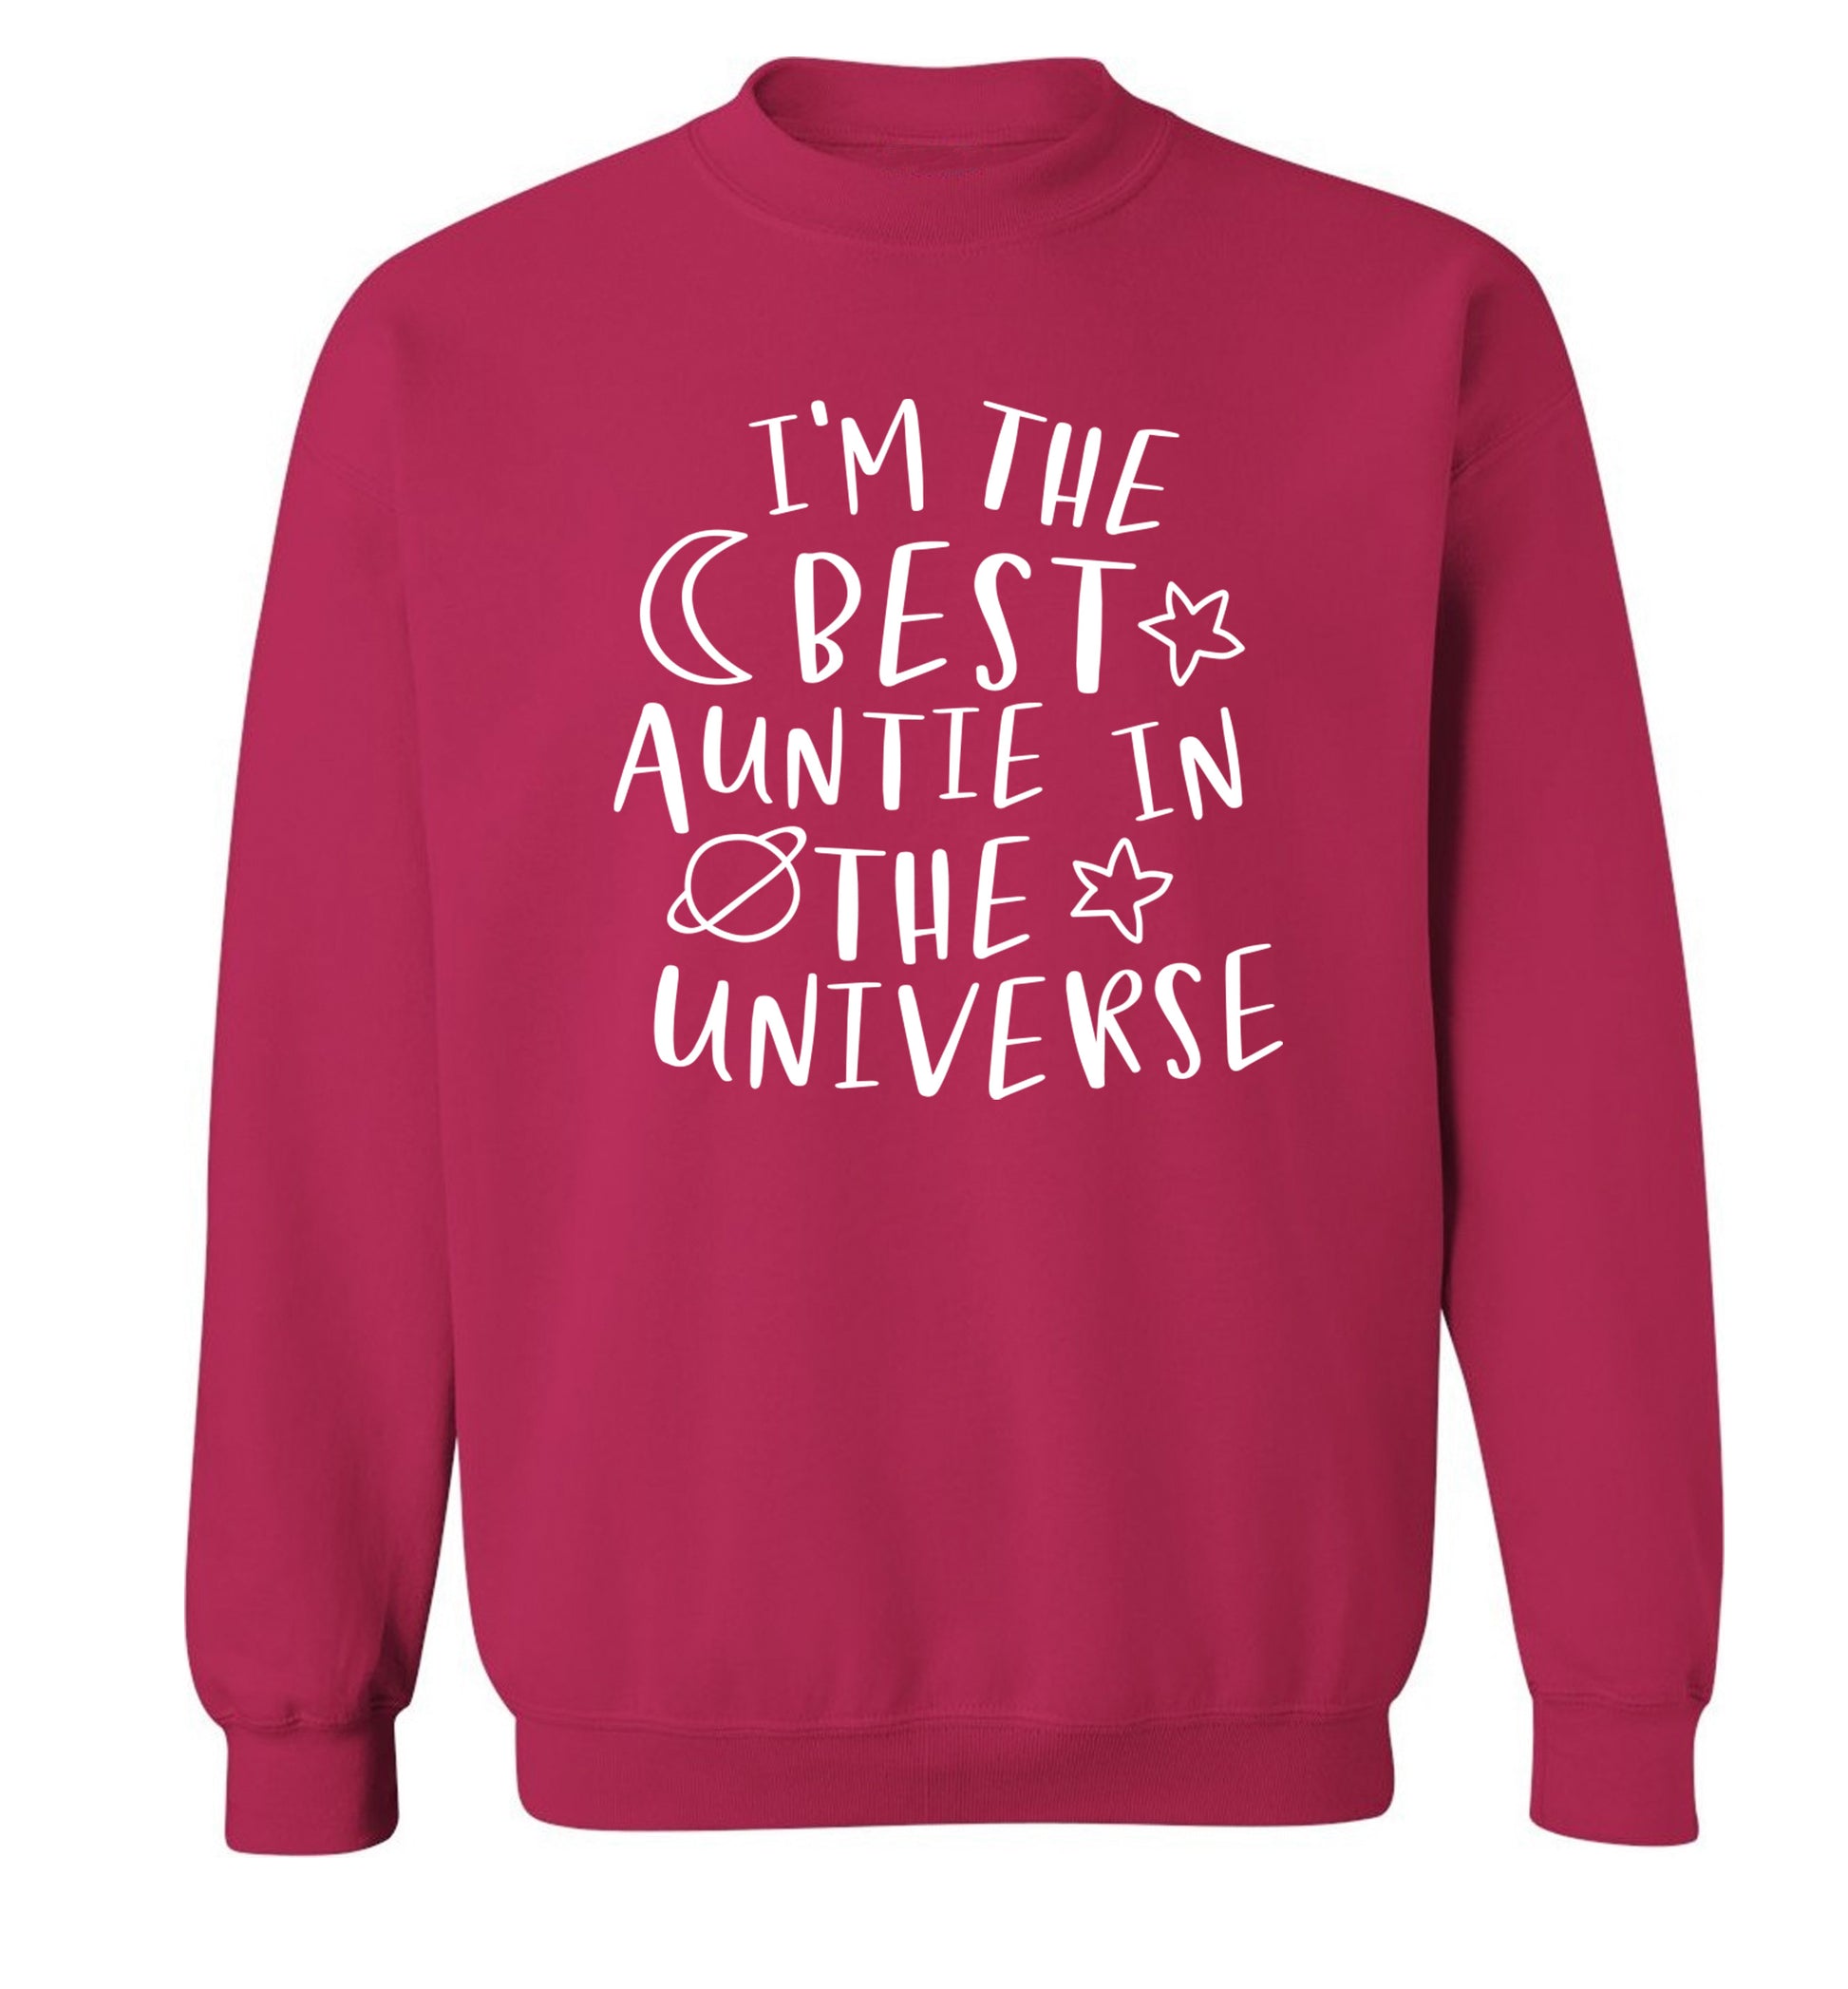 I'm the best auntie in the universe Adult's unisex pink Sweater 2XL